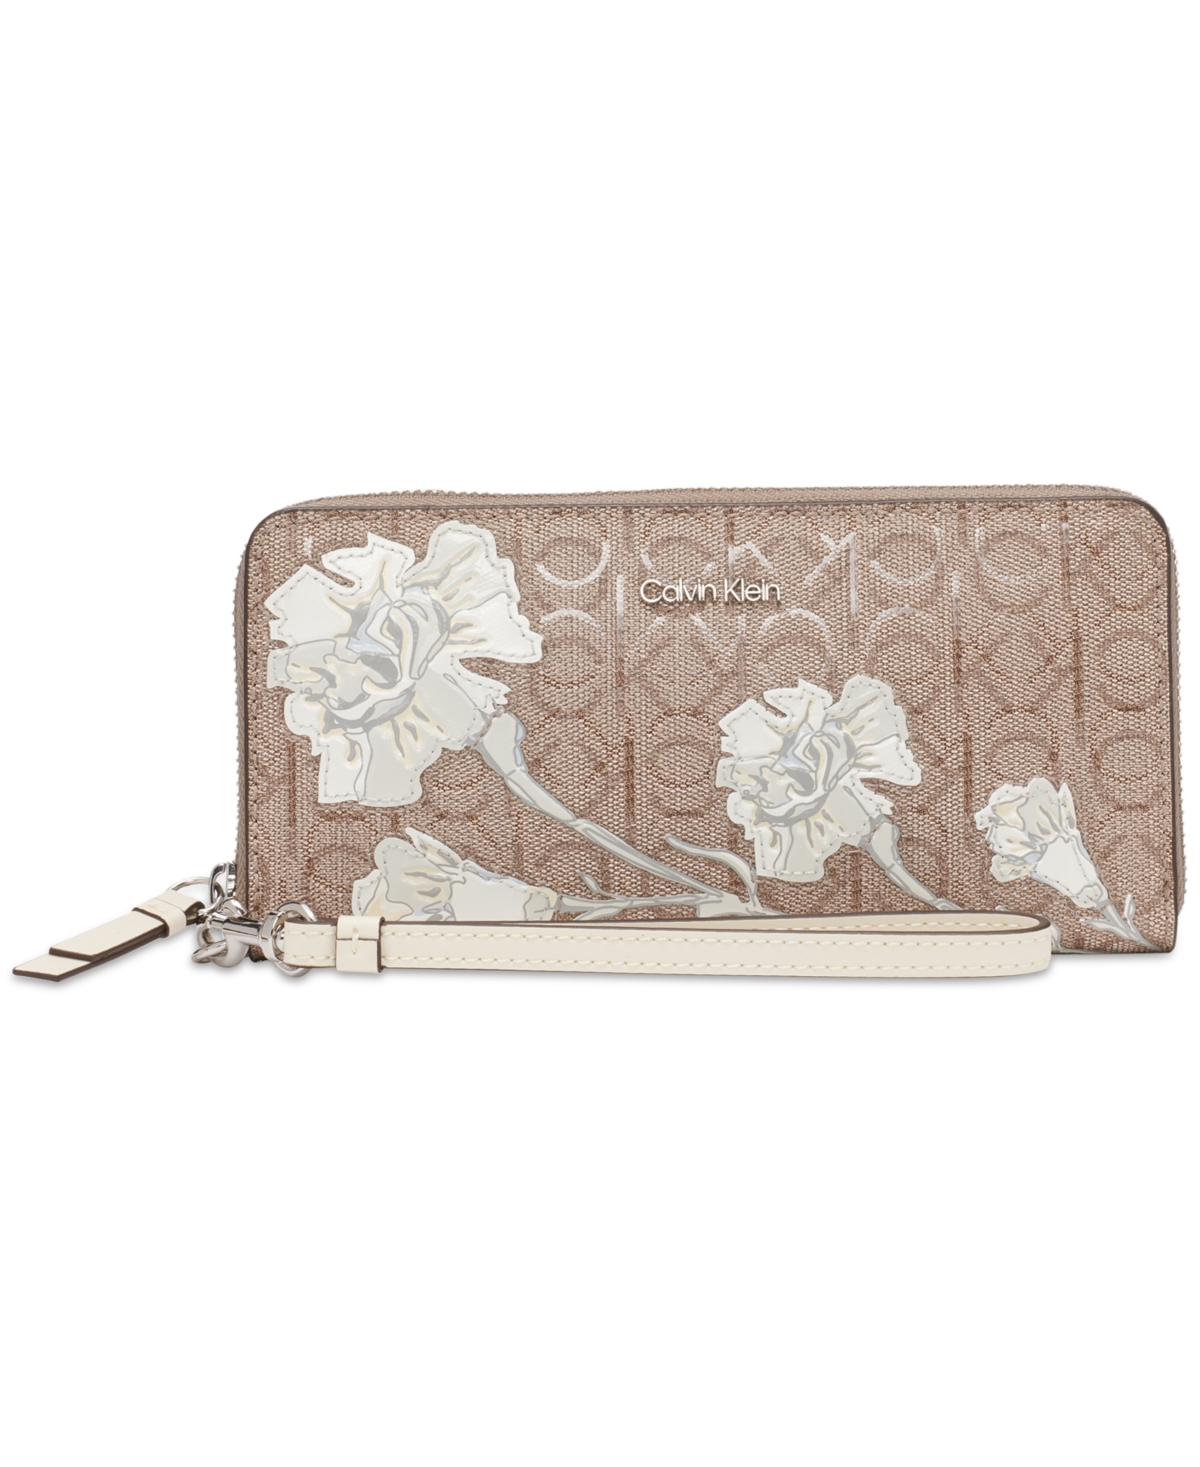 Calvin Klein Audrey Floral Signature Boxed Wallet In Almond Multi